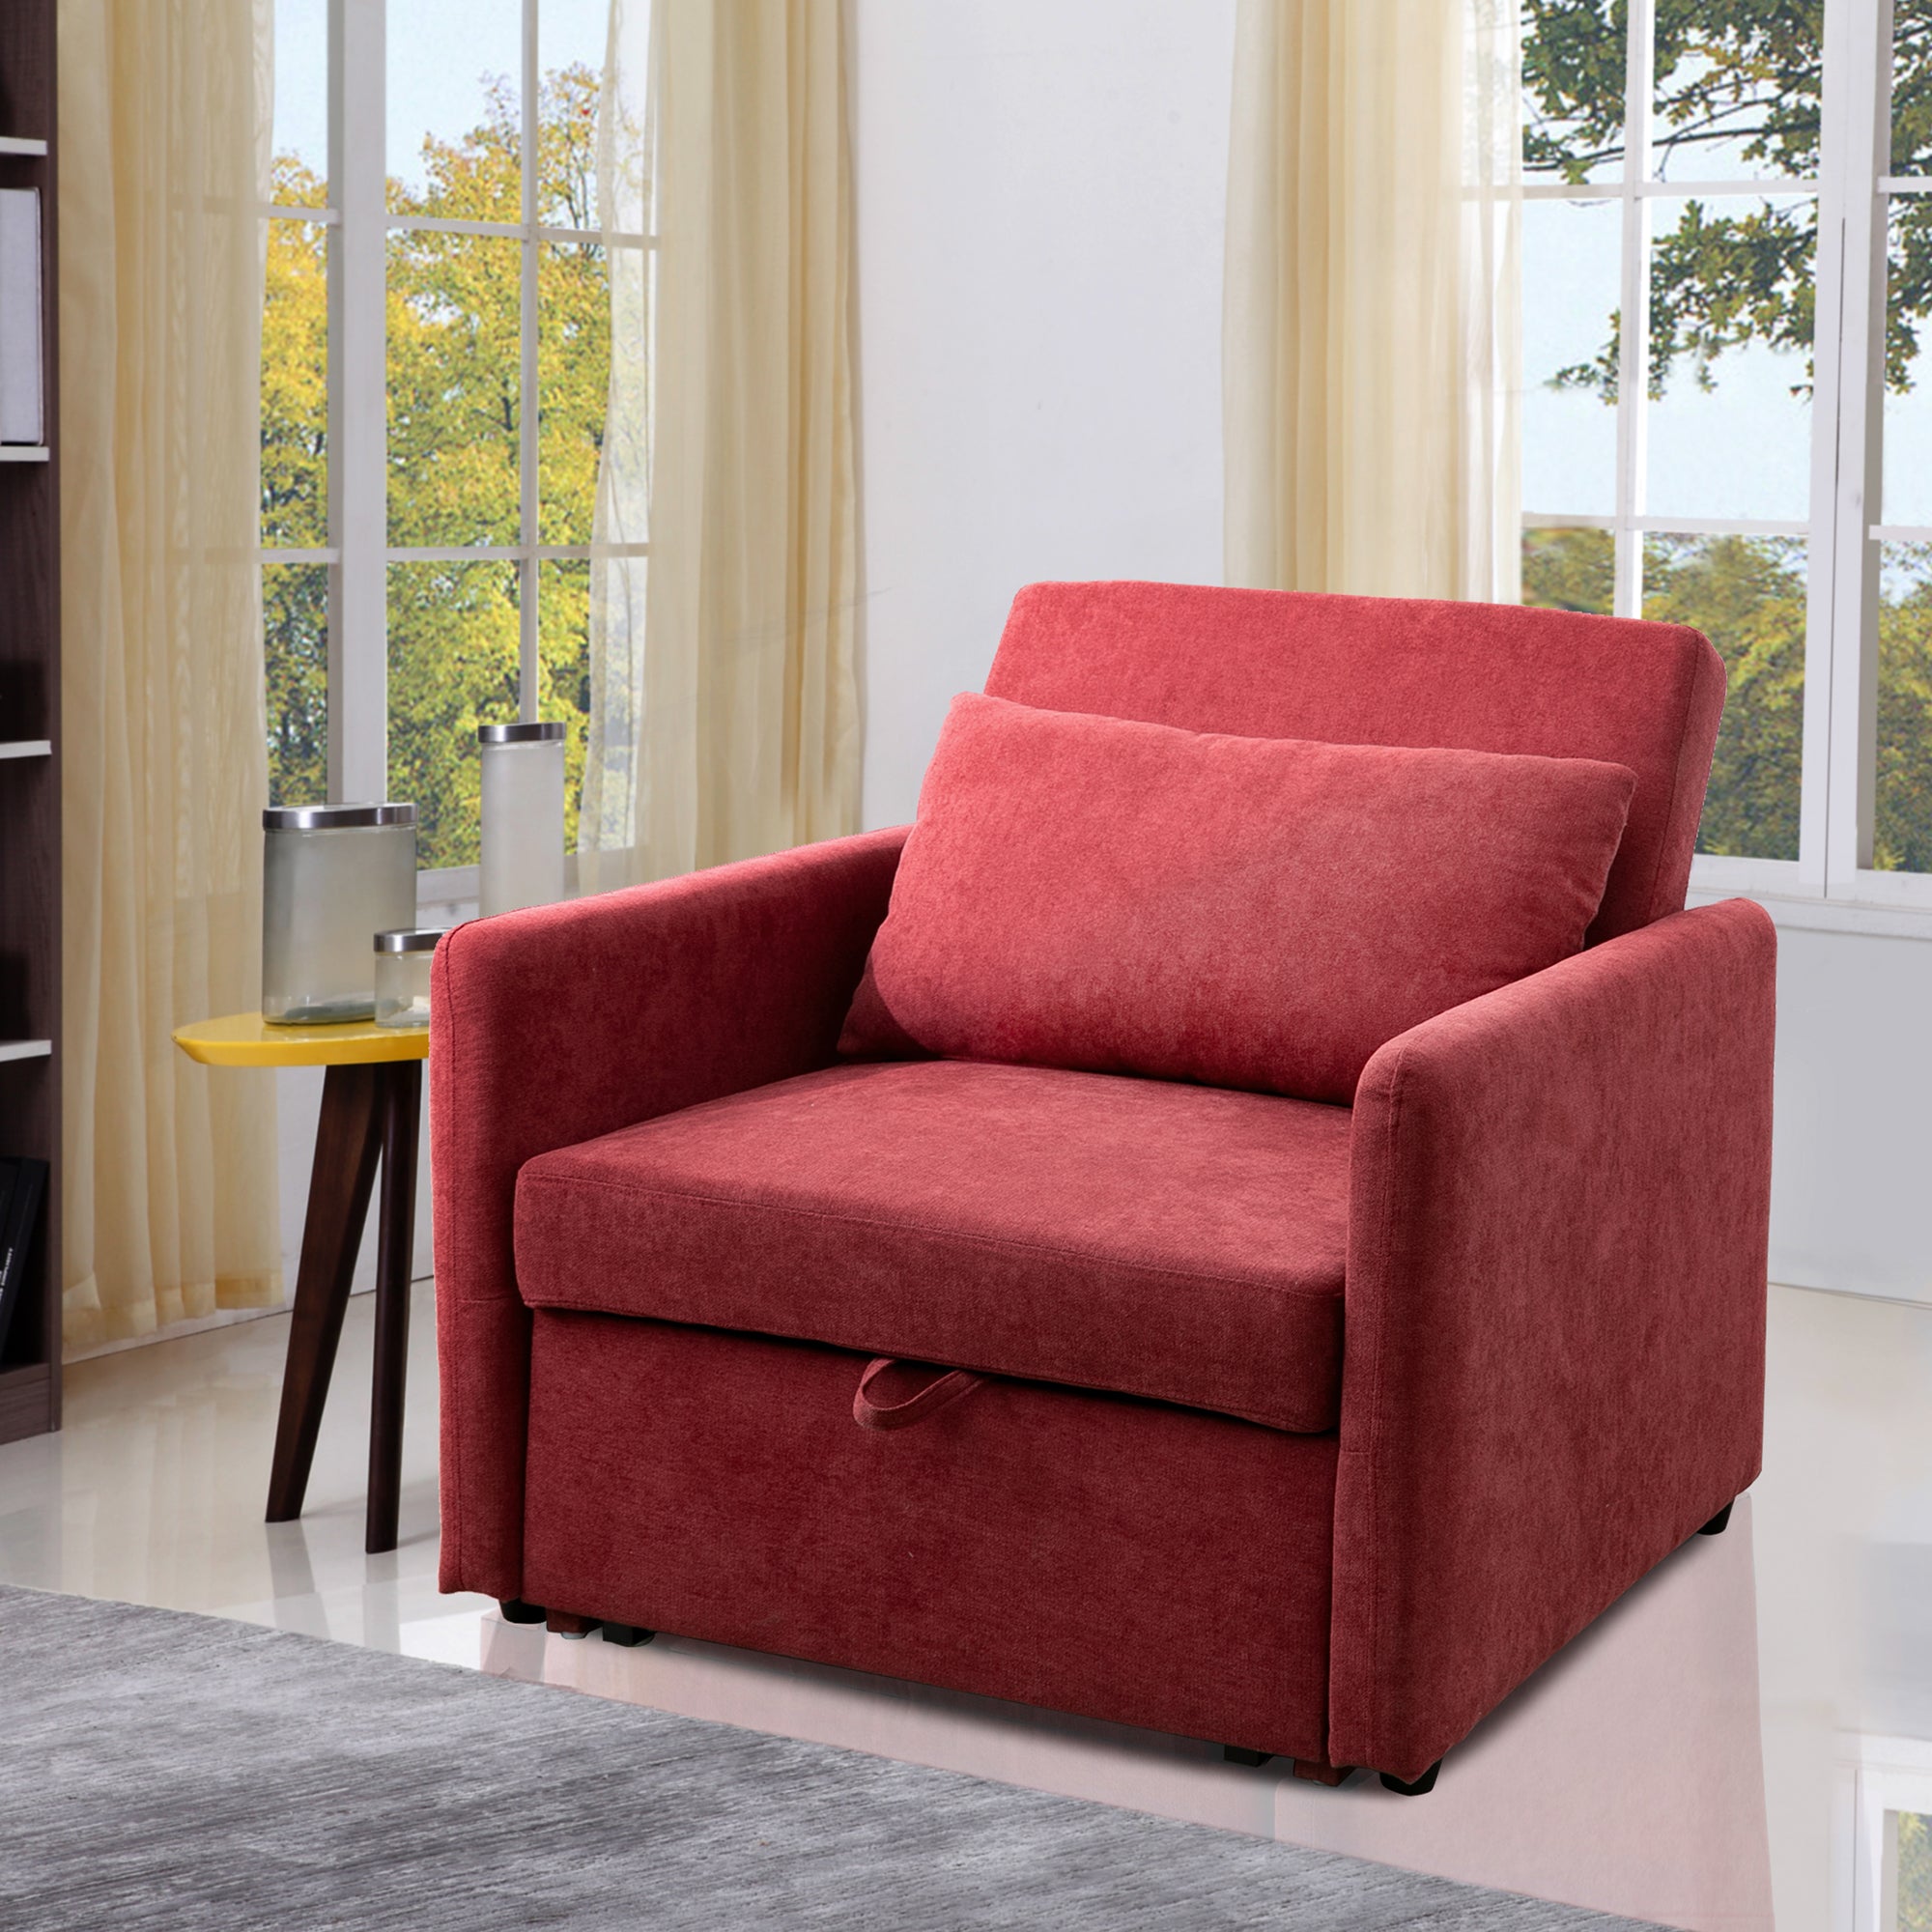 Ainehome Red Lint foldable Sofa bed